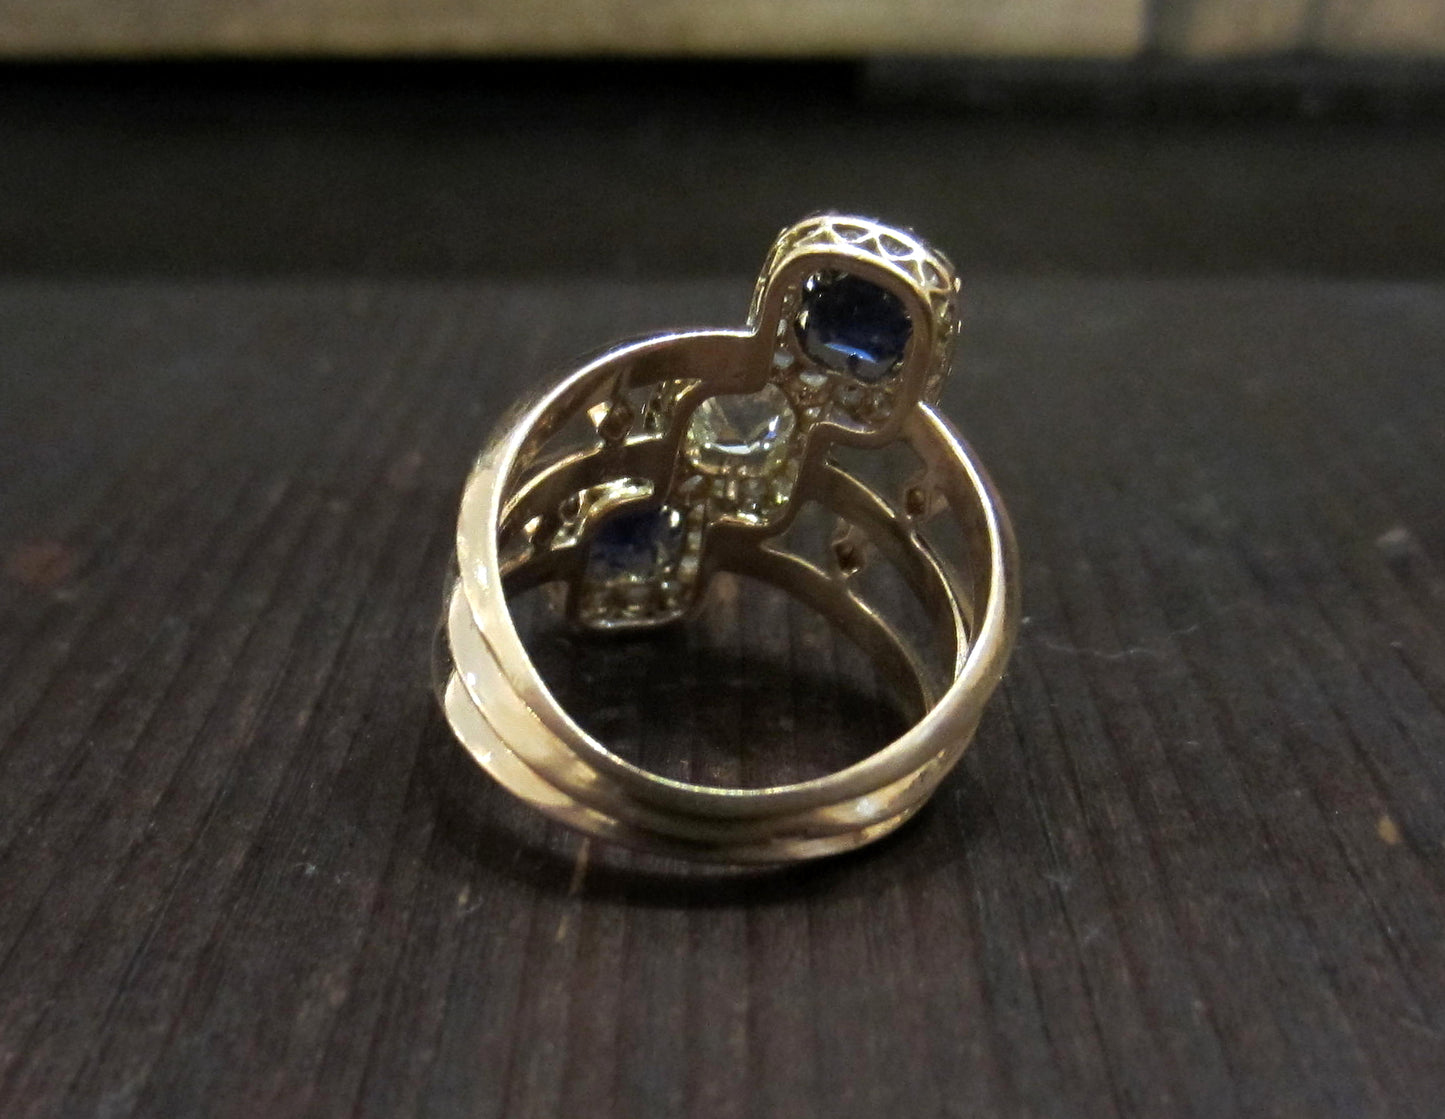 SOLD--Exquisite French Diamond and Sapphire Ring 18k c. 1880